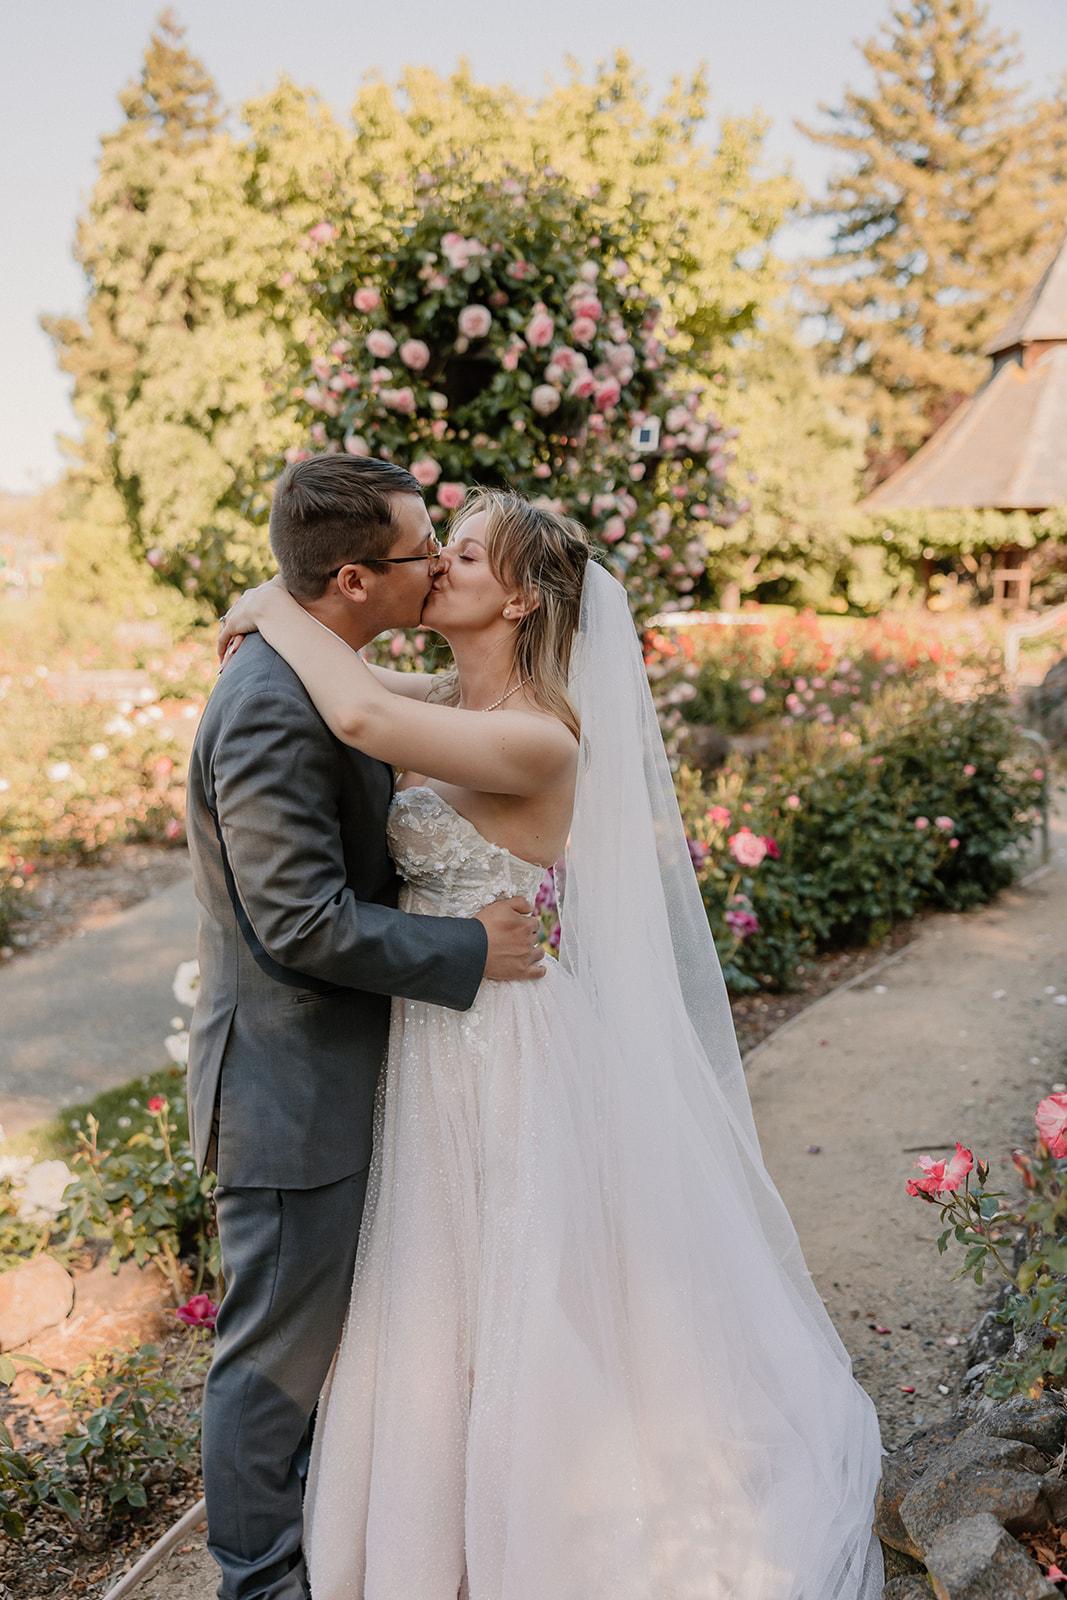 A bride and groom share a kiss outdoors in a garden setting, with the bride holding a large bouquet of flowers and a scenic background of trees and a pond at their wedding at the gardens at heather farms